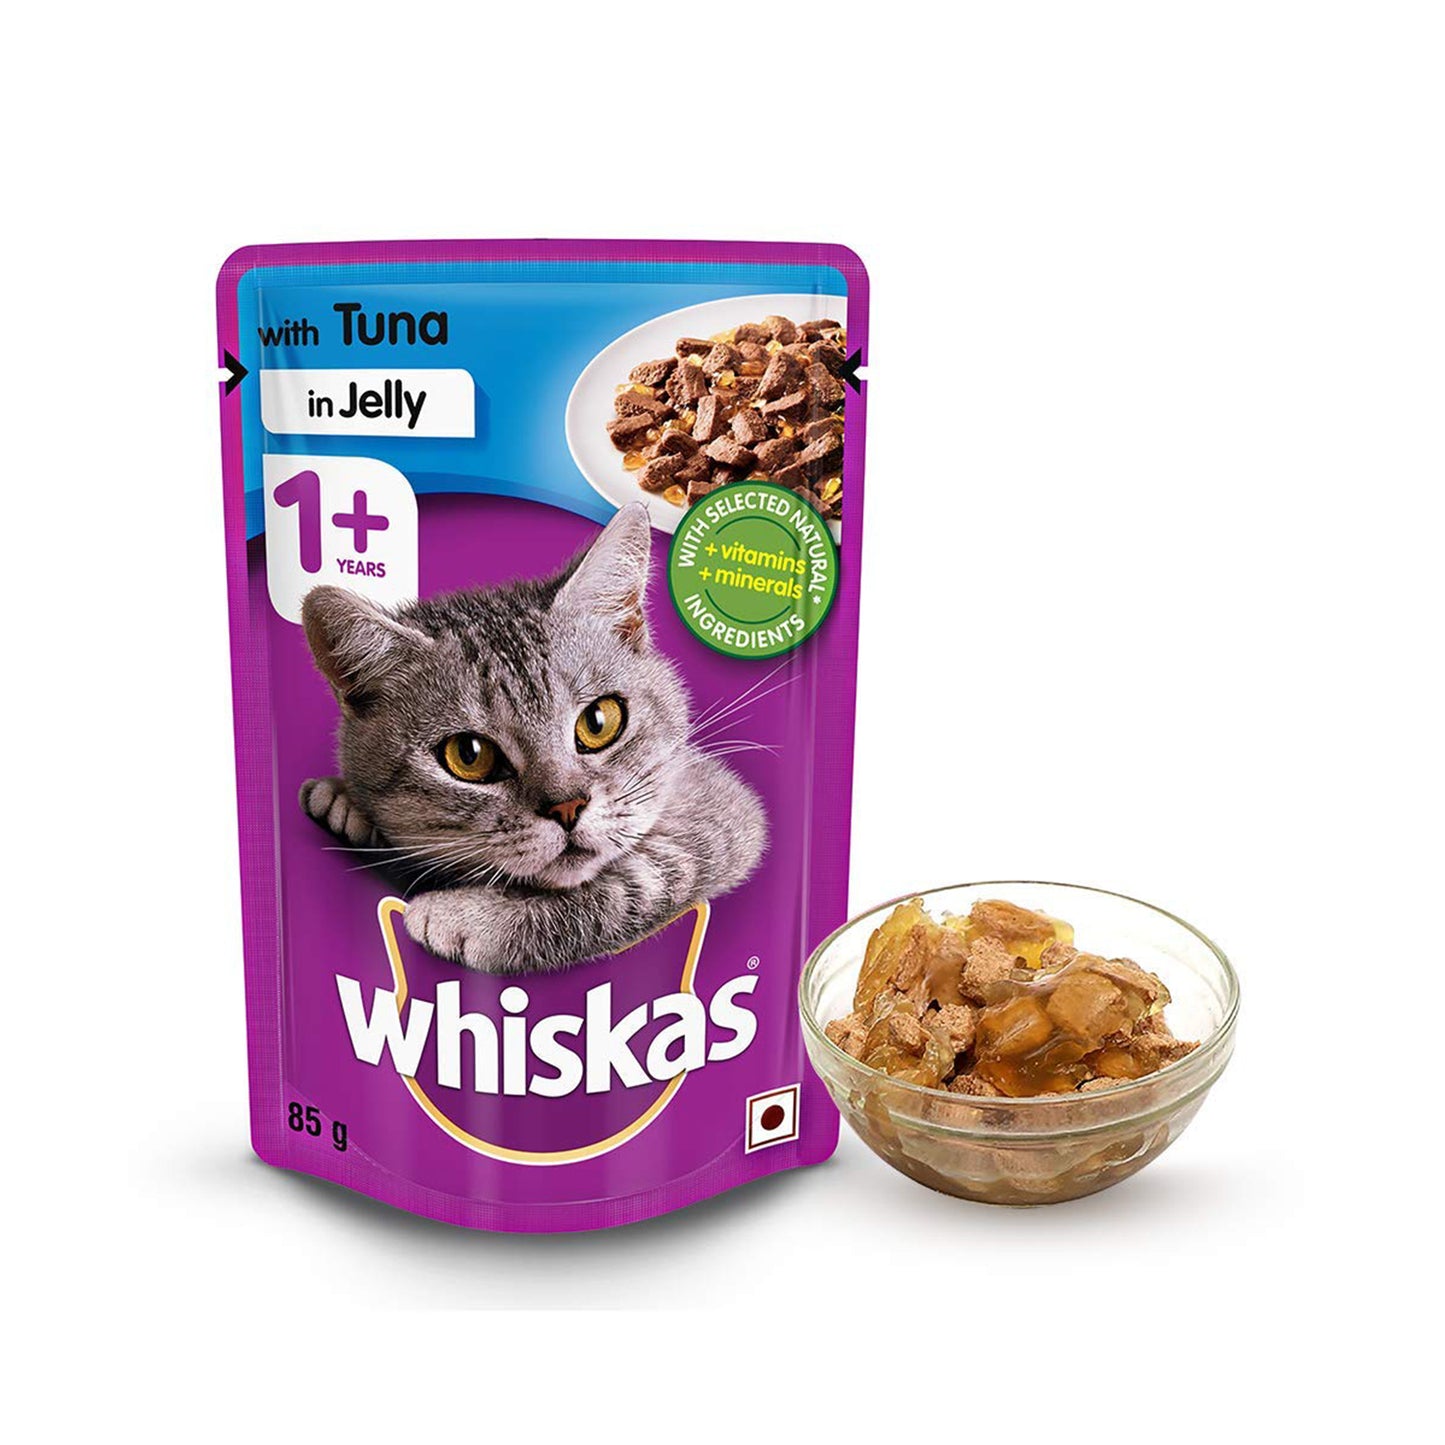 Whiskas - Wet Cat Food Tuna in Jelly For Cats (+1 year)